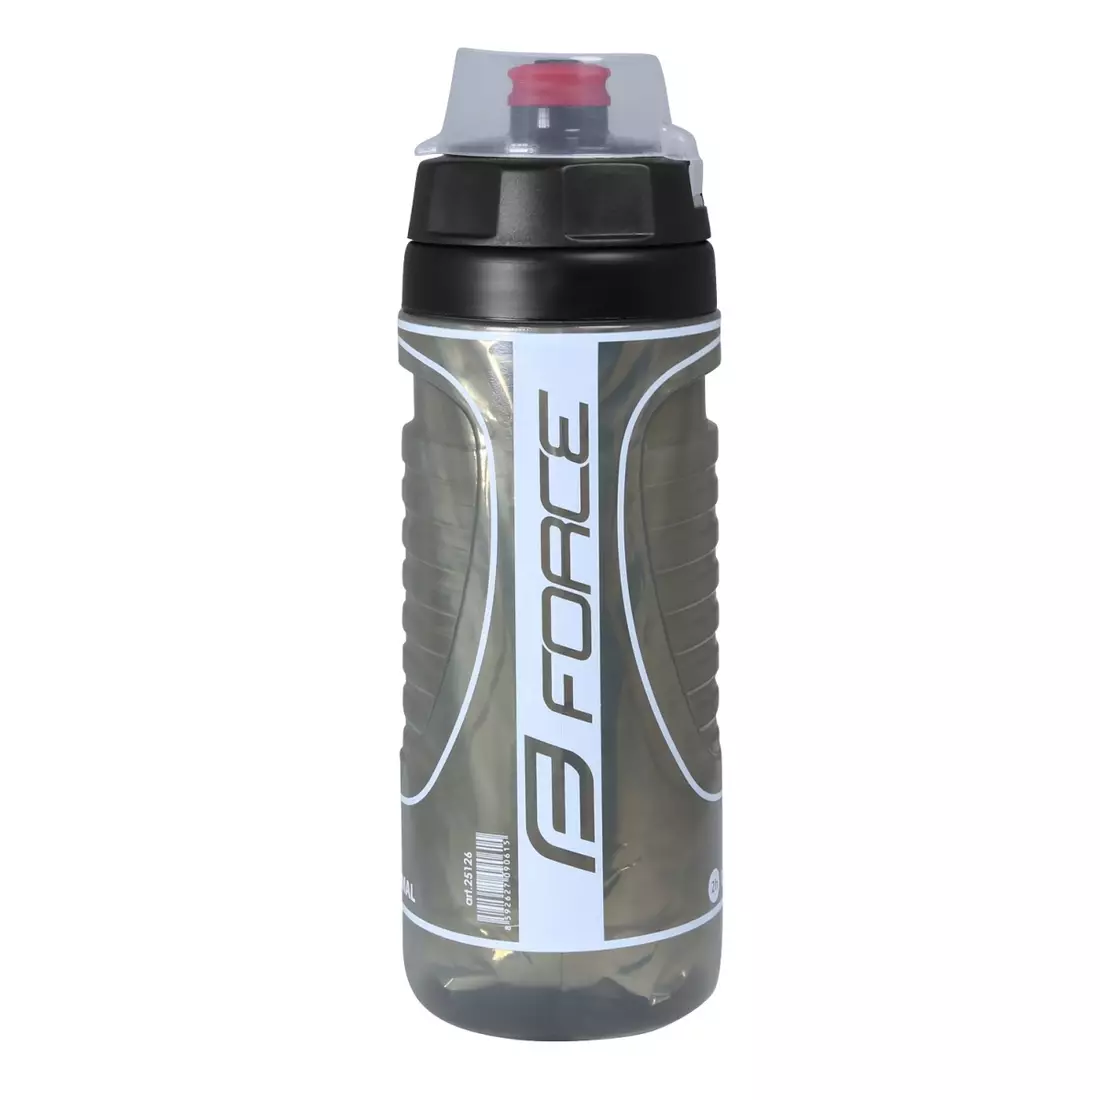 FORCE thermal water bottle HEAT 0,5l black and gray 25126